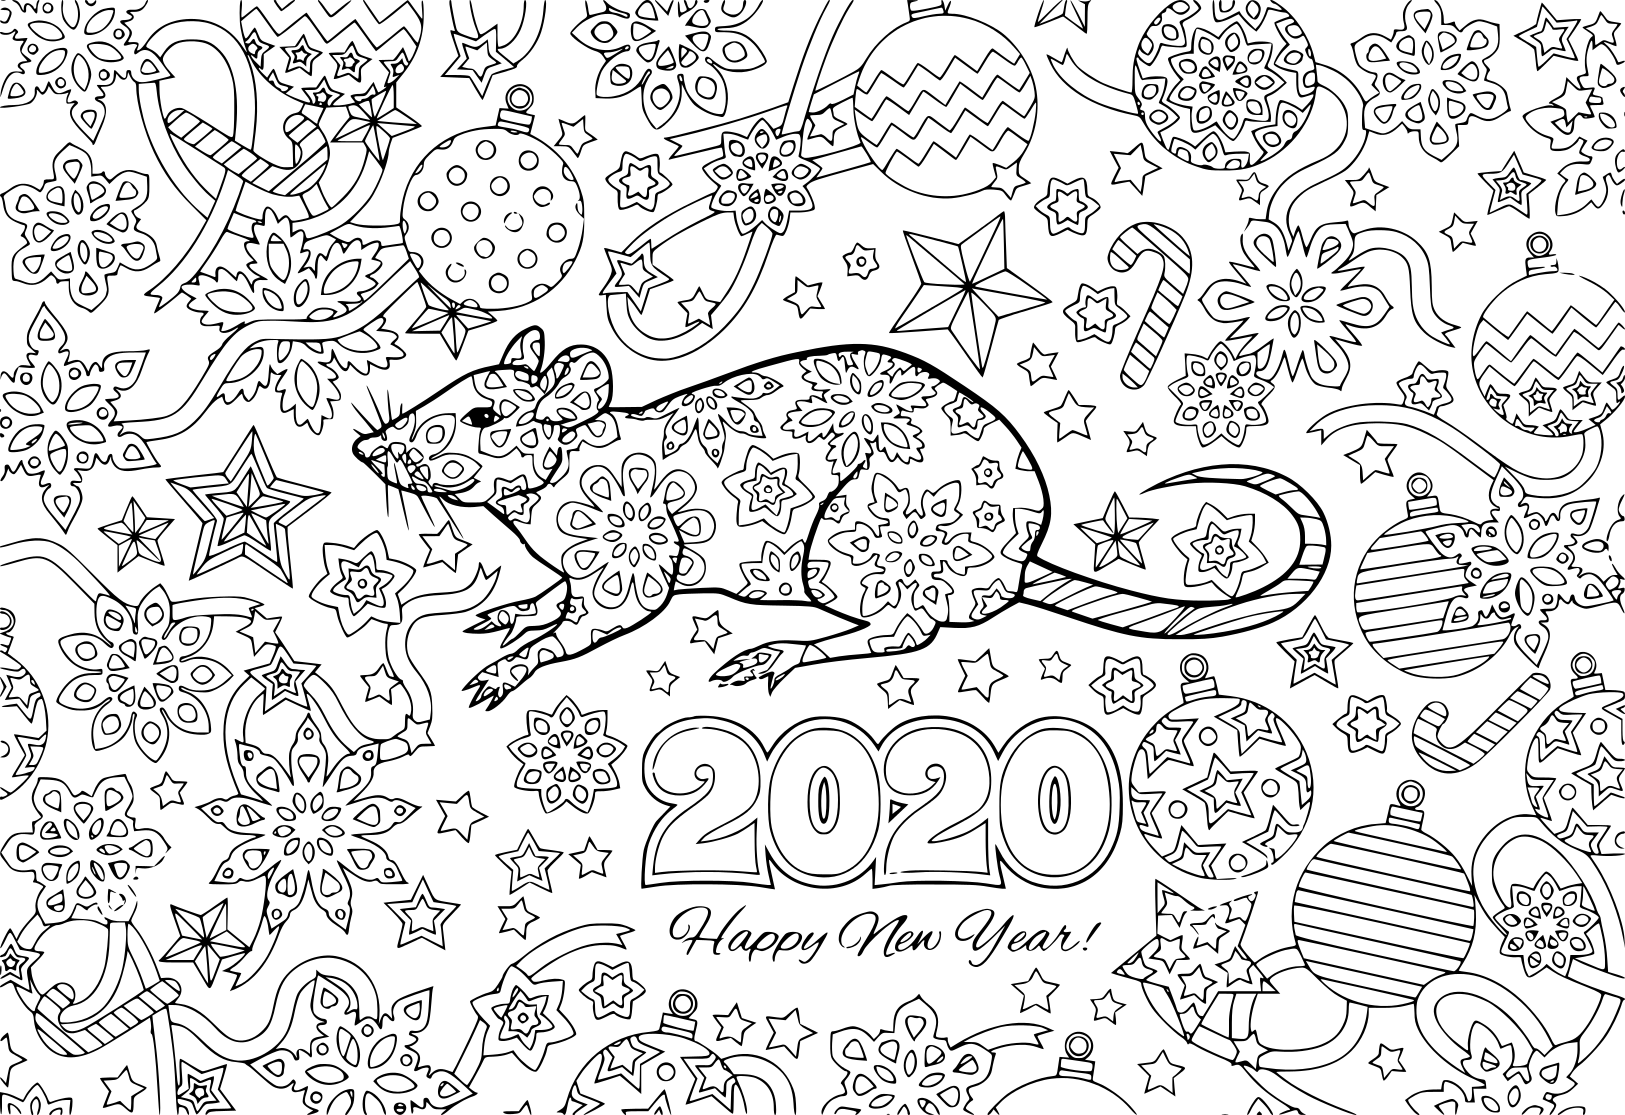 New Year 2020 Rat And Festive Objects Image For Calendar Coloring Page